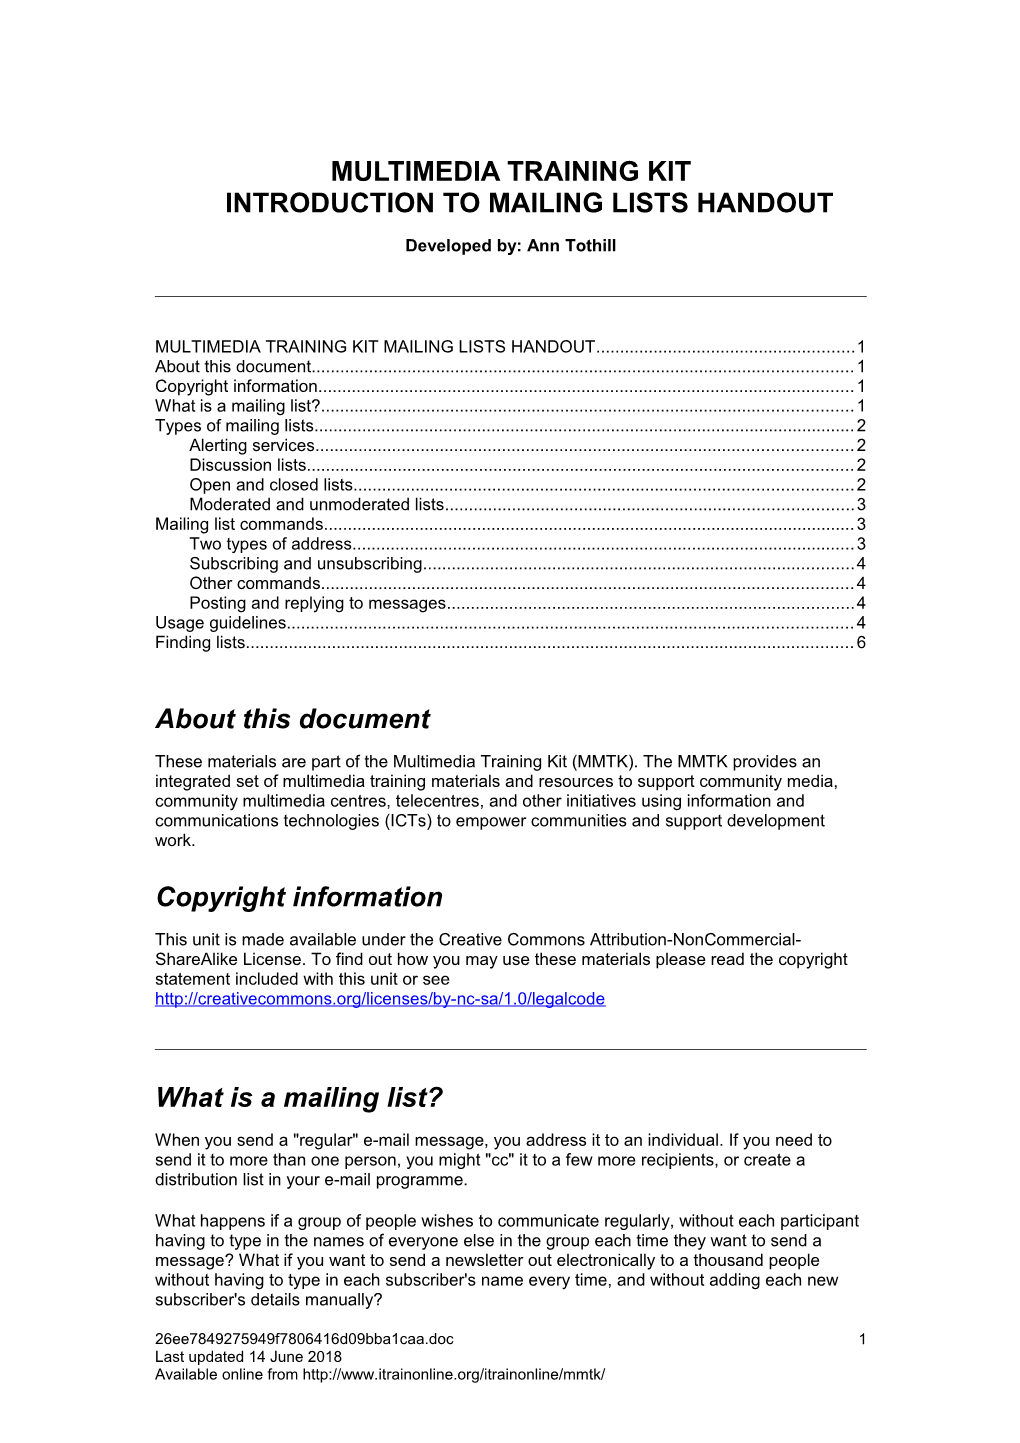 Multimedia Training Kitintroduction to Mailing Lists Handout